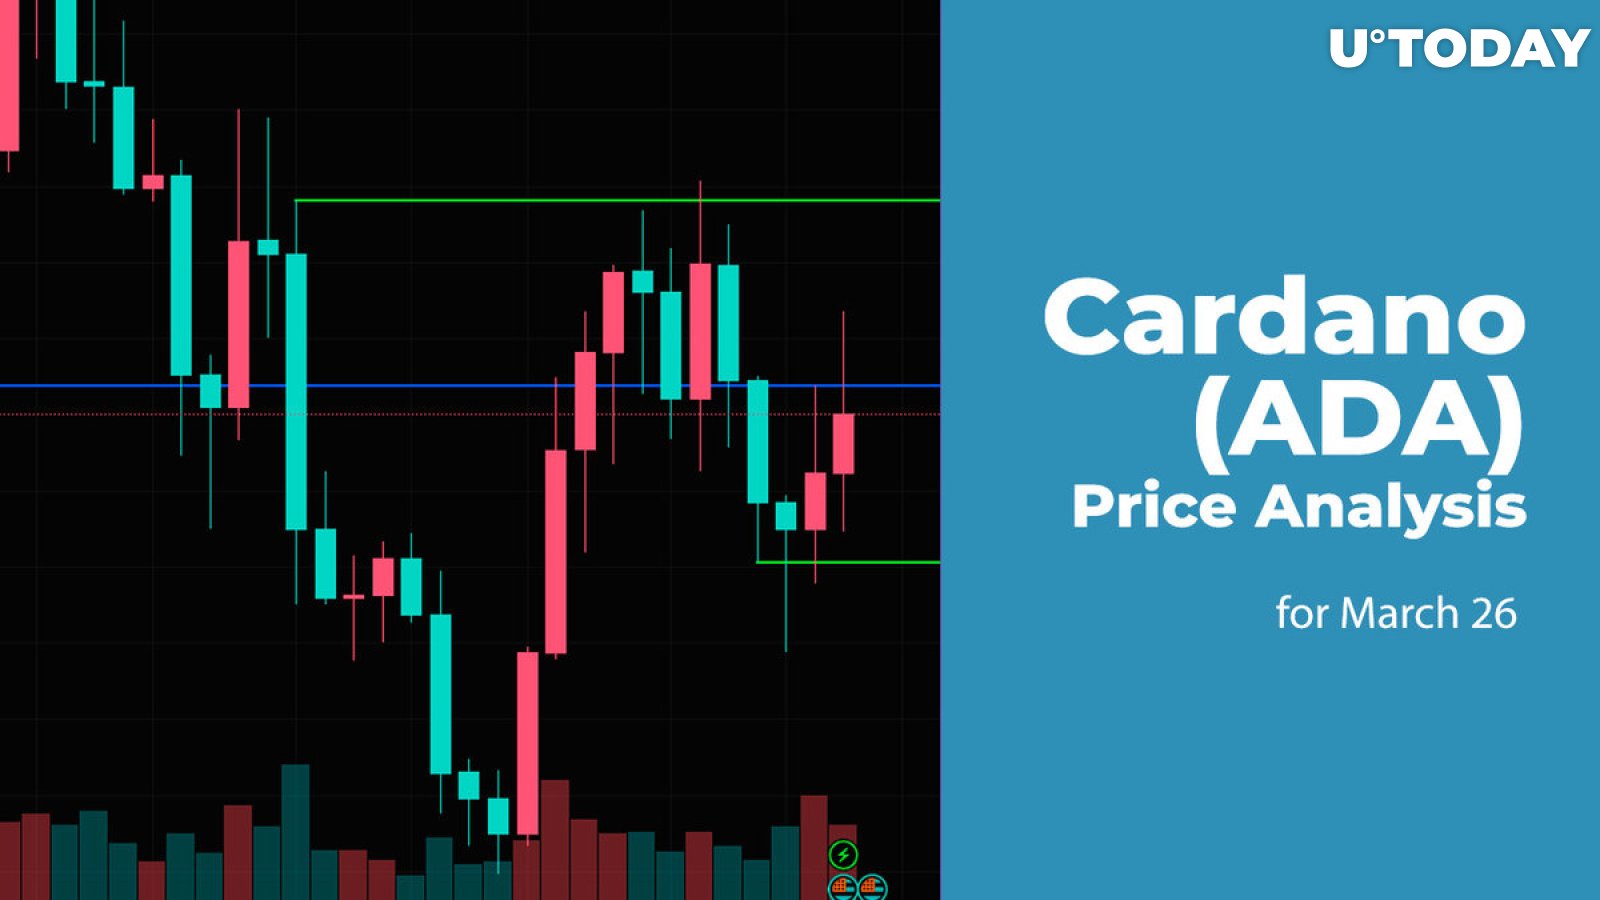 Cardano (ADA) Price Analysis for March 26